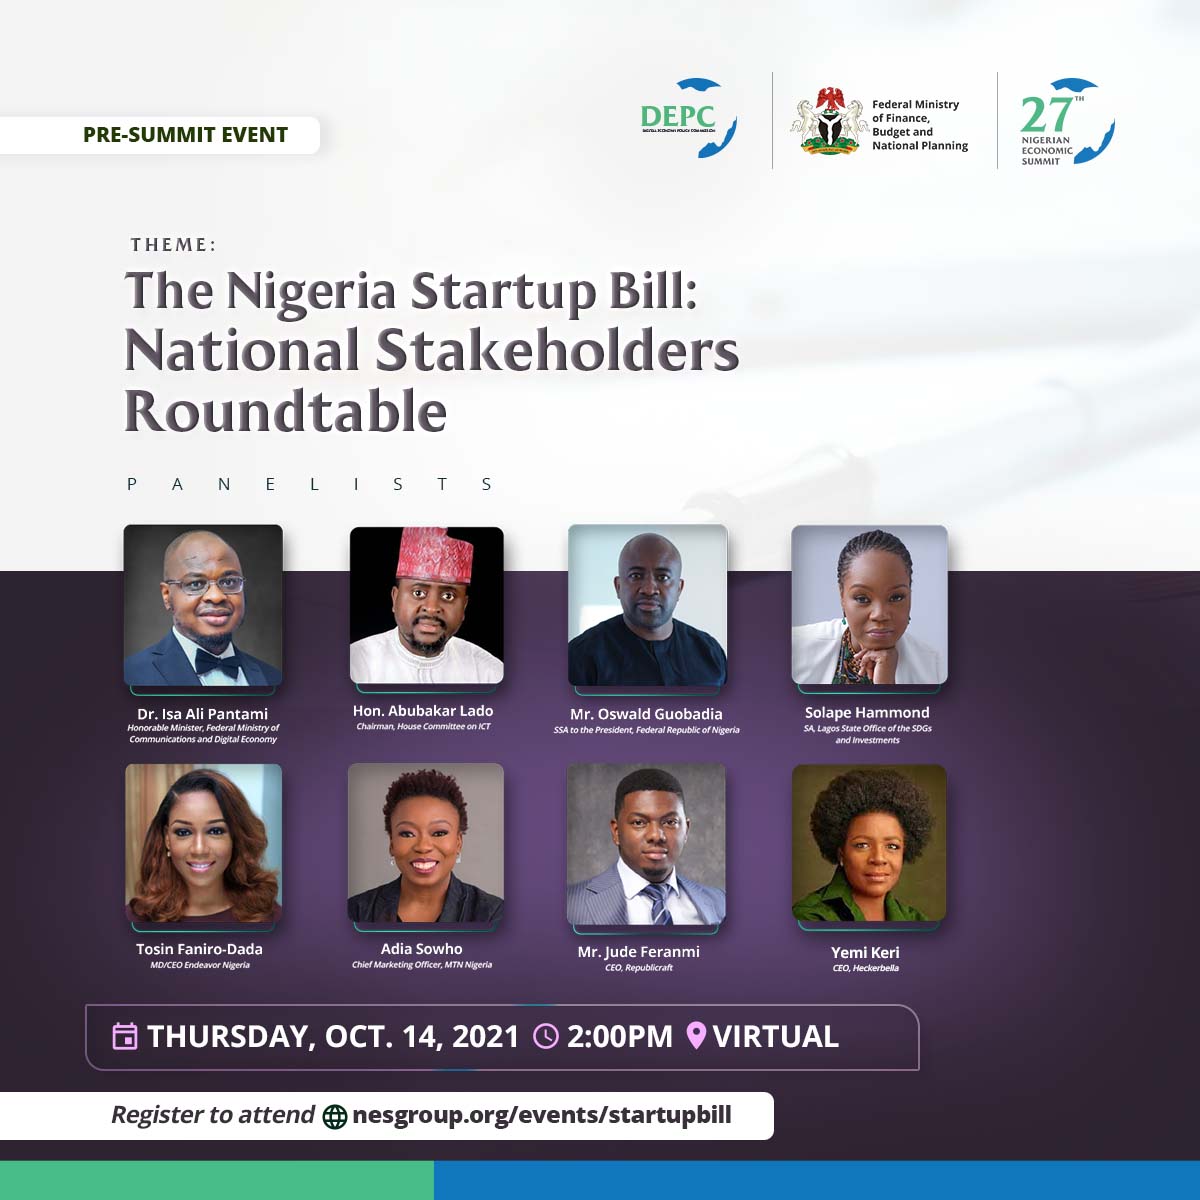 Digital Economy, The Nigerian Economic Summit Group, The NESG, think-tank, think, tank, nigeria, policy, nesg, africa, number one think in africa, best think in nigeria, the best think tank in africa, top 10 think tanks in nigeria, think tank nigeria, economy, business, PPD, public, private, dialogue, Nigeria, Nigeria PPD, NIGERIA, PPD